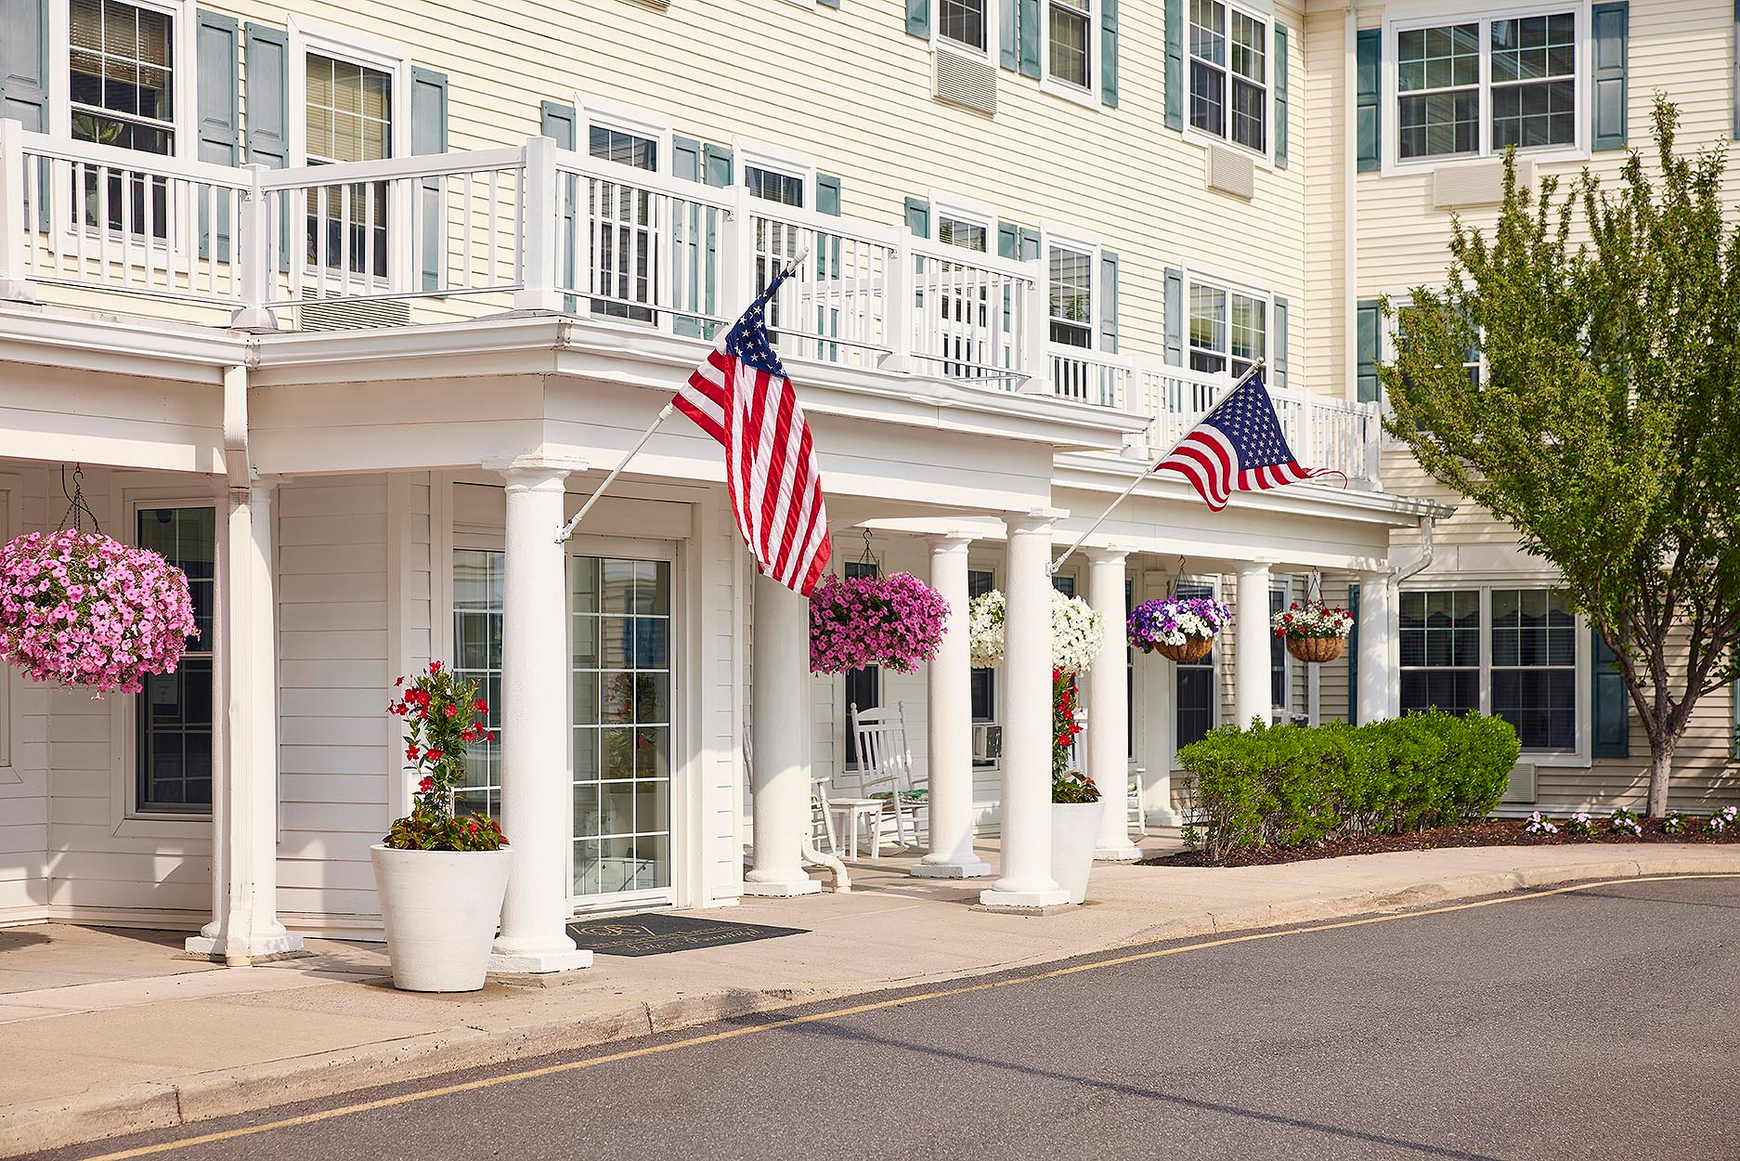 American flags and colorful flowers greet you at the entrance